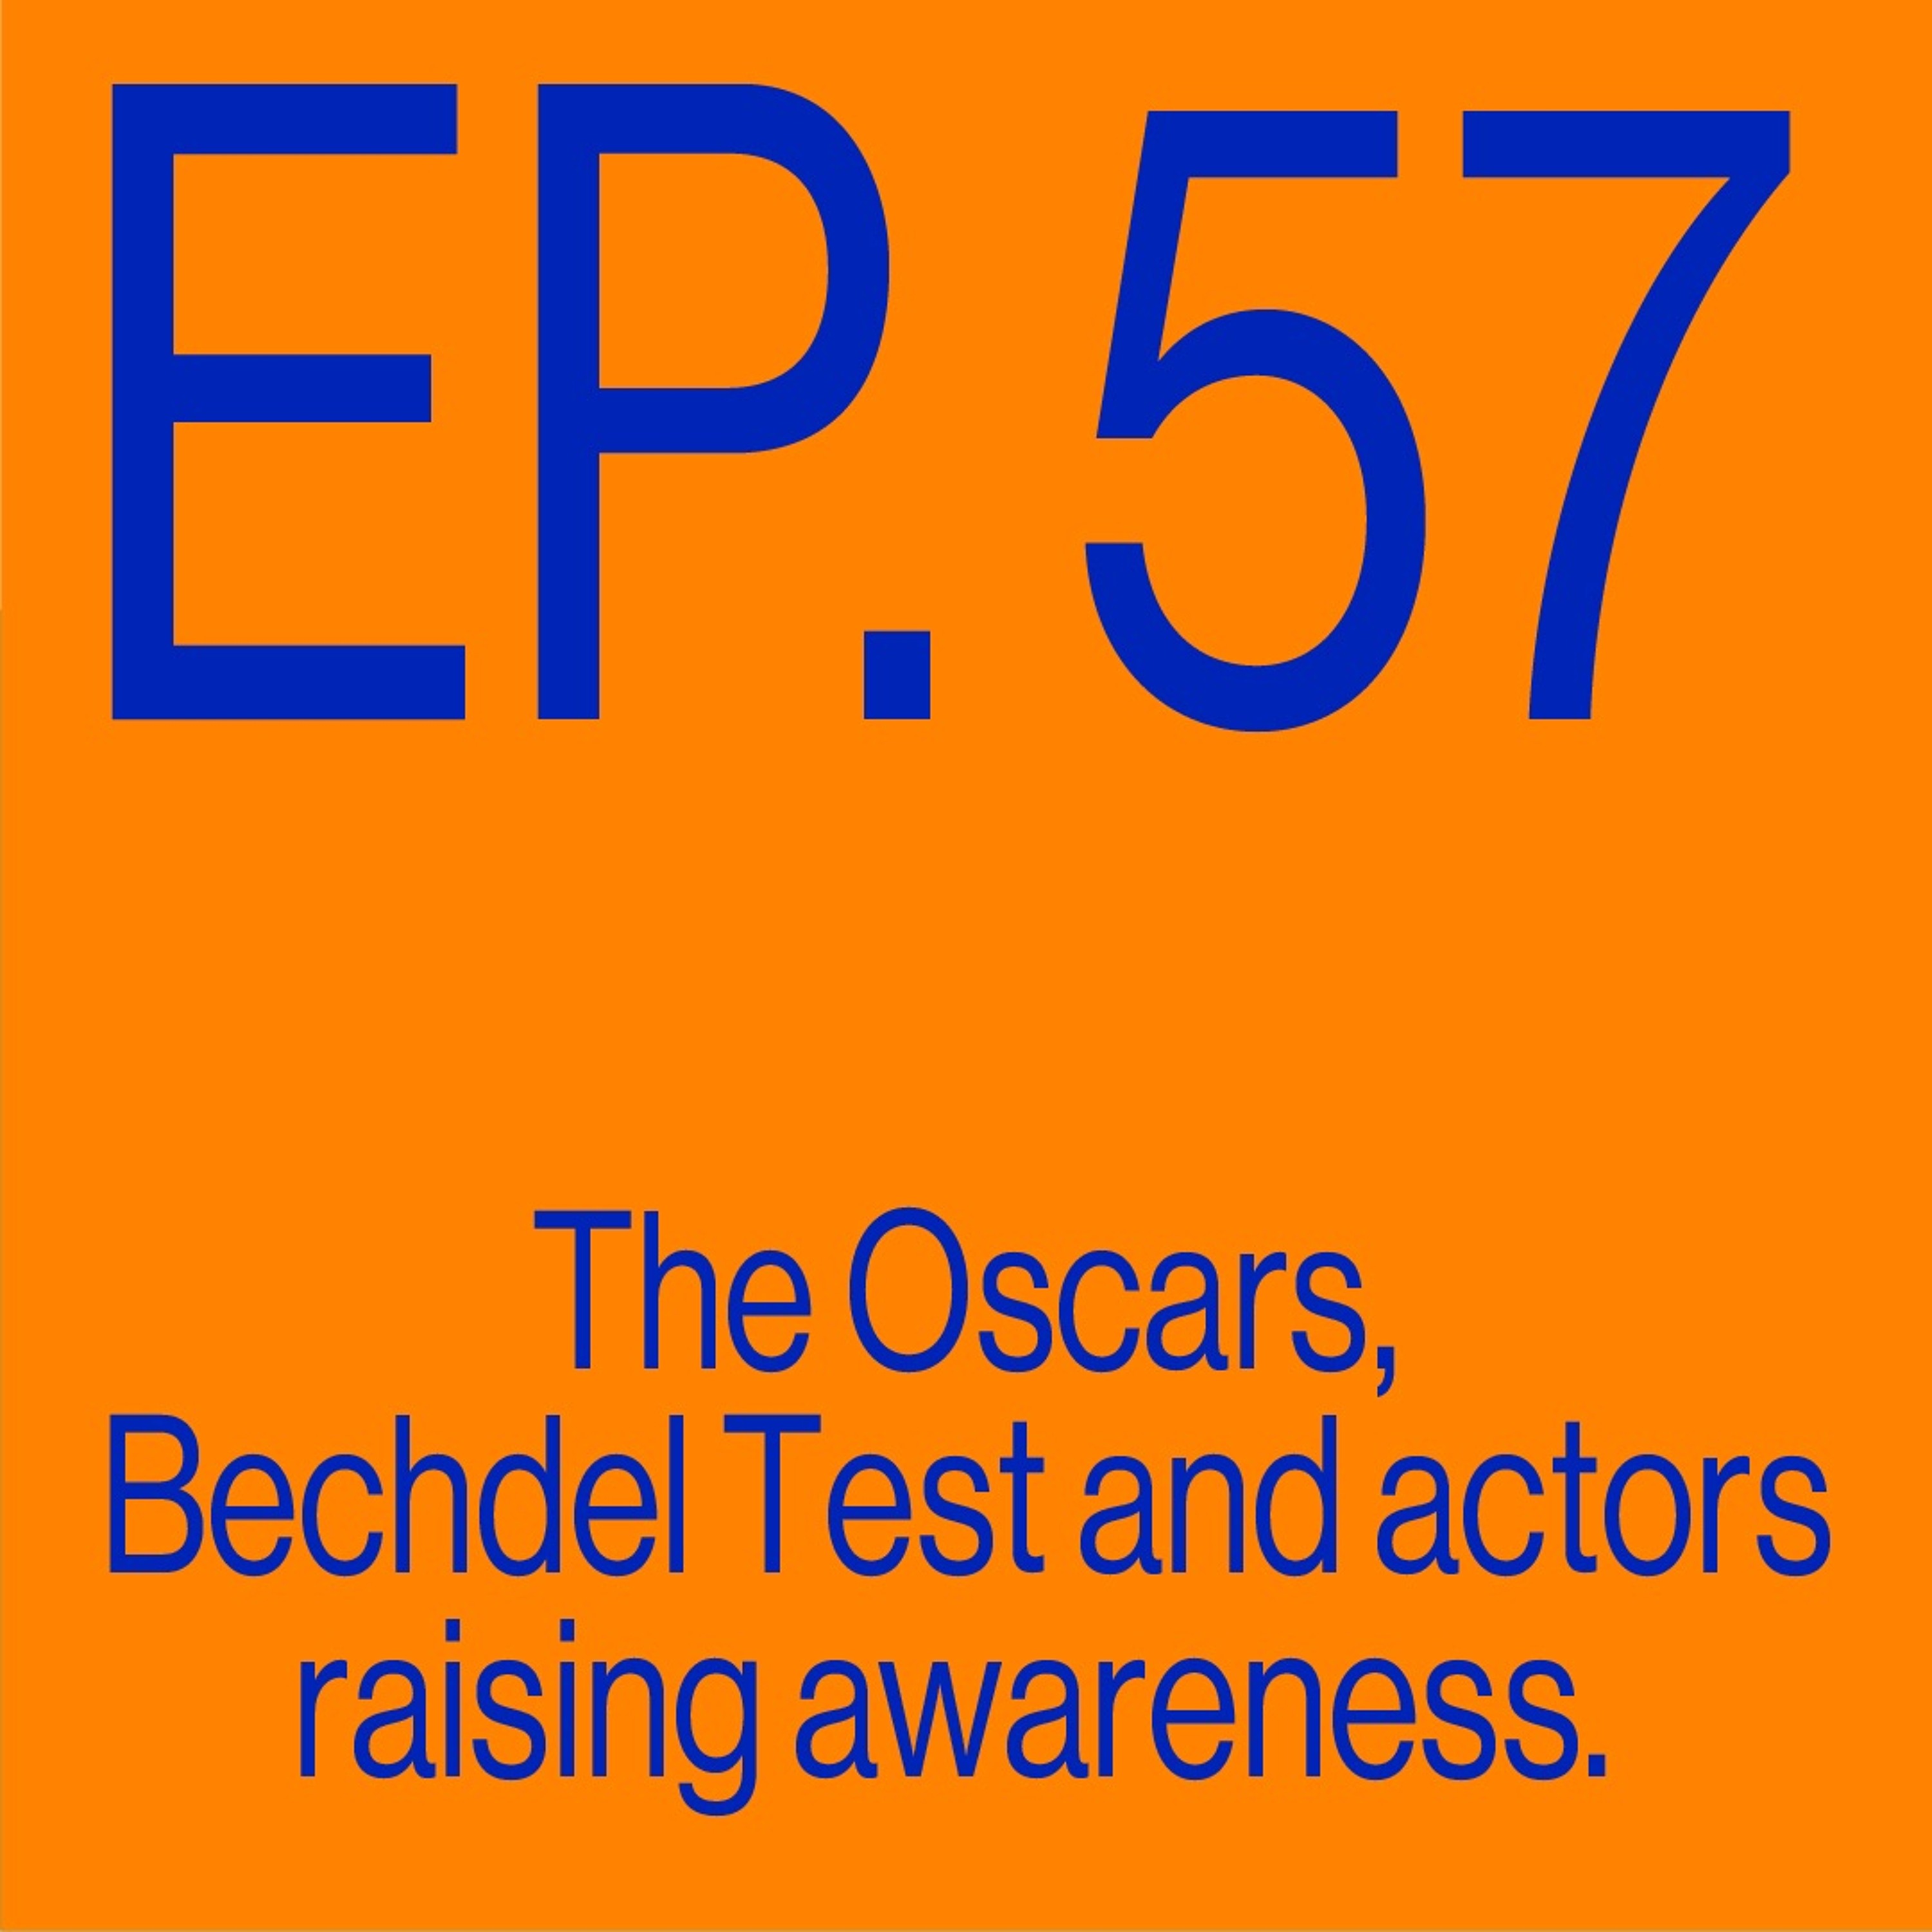 Episode 57: The Oscars, Bechdel Test And Actors Raising Awareness